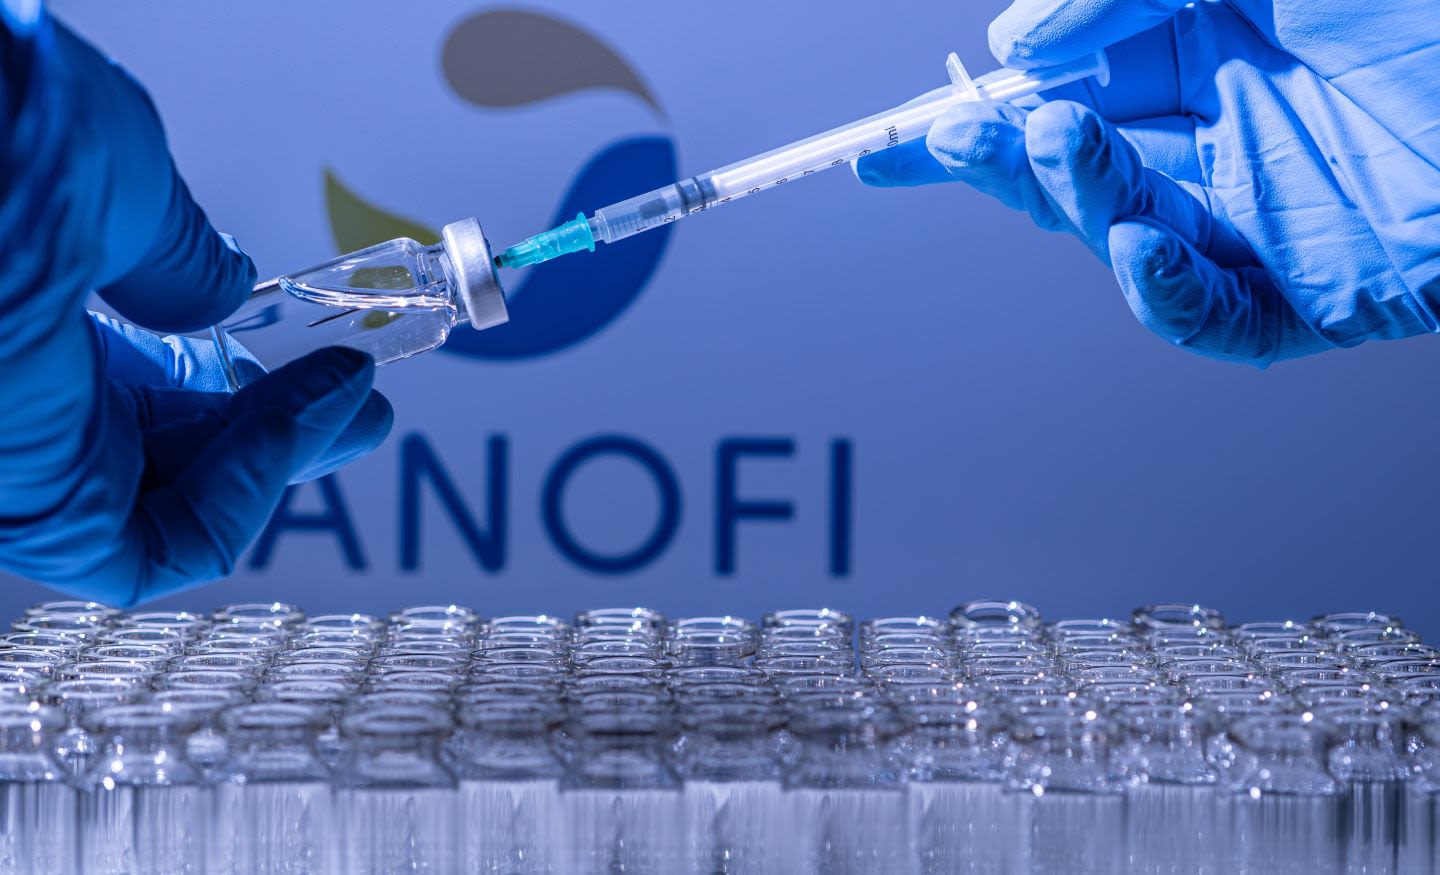 Sanofi to make €1bn biomanufacturing investment in France